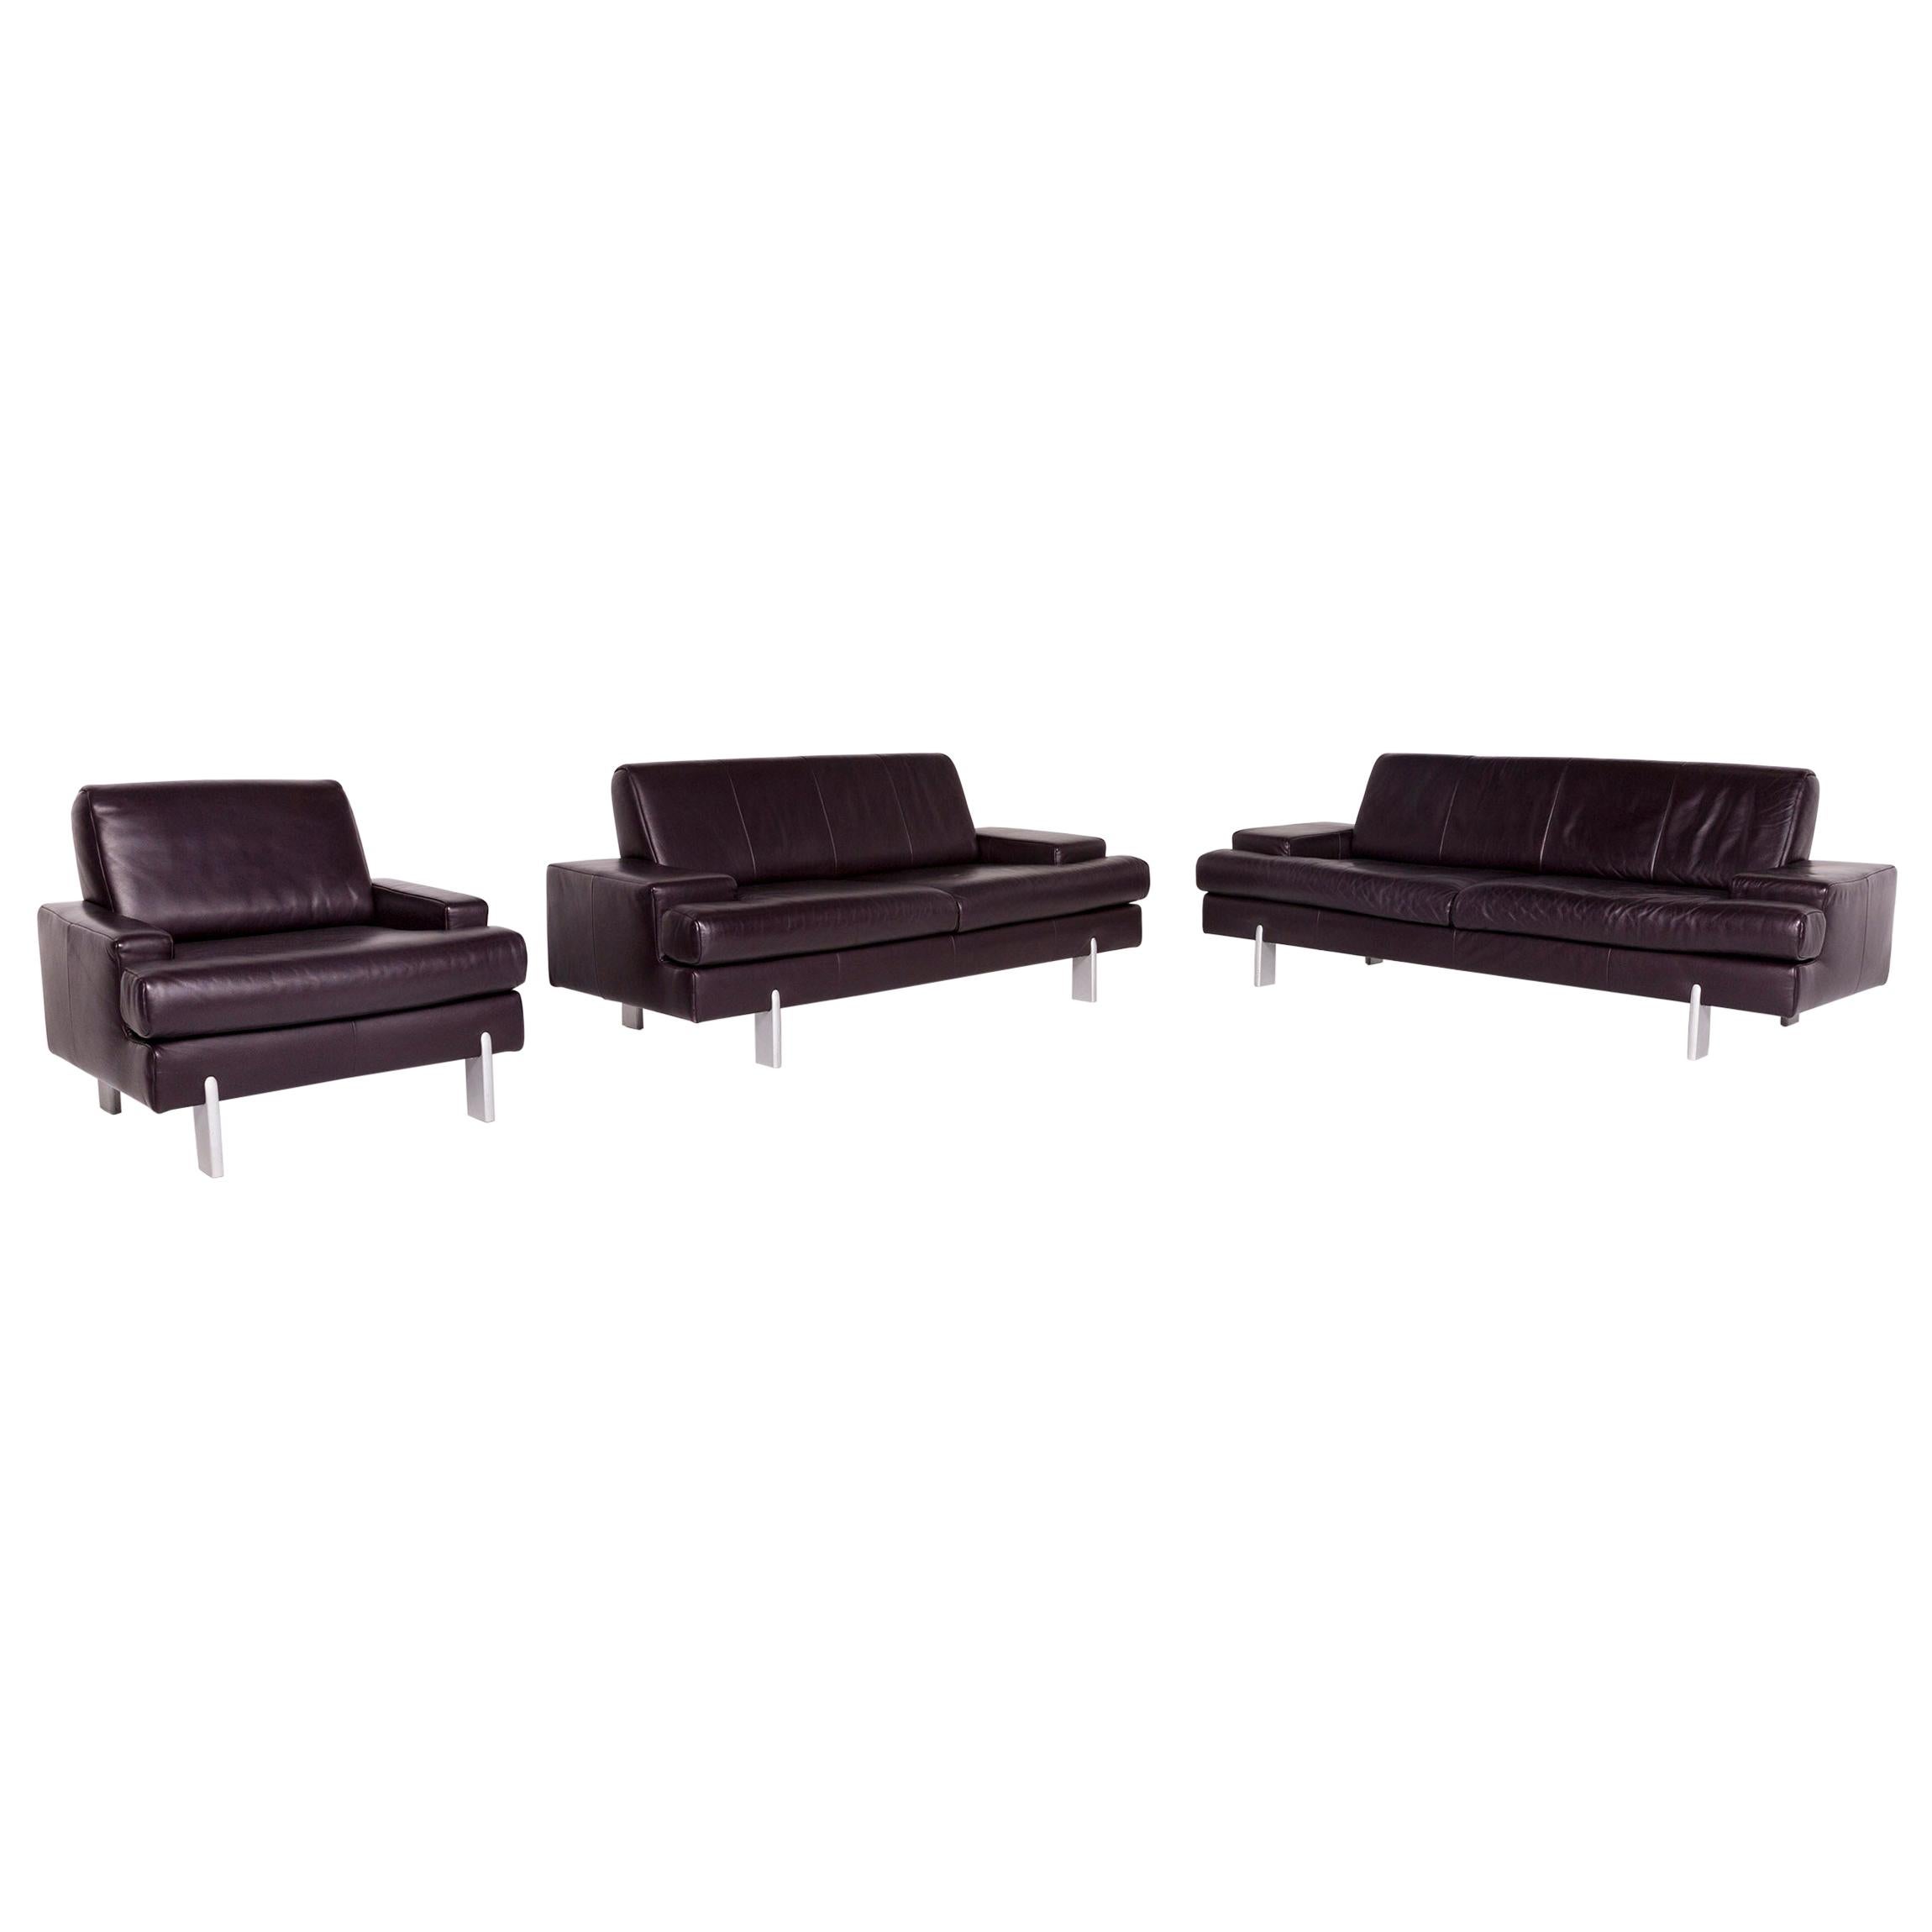 BMP Rolf Benz Leather Sofa Set Eggplant 1 Three-Seat, 1 Two-Seat, 1 For Sale